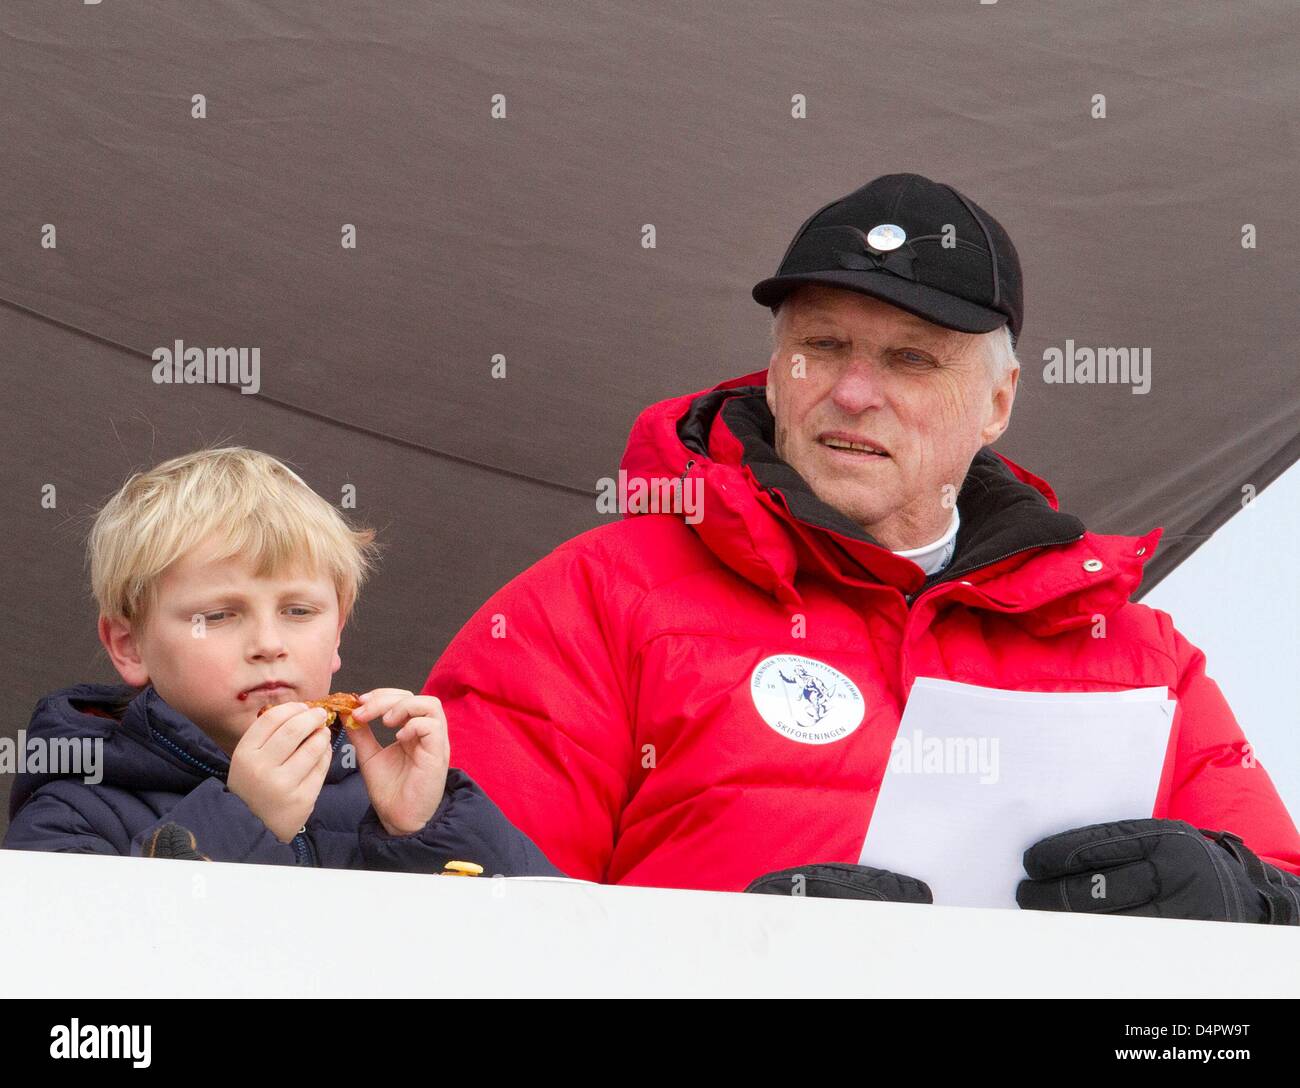 prince-sverre-magnus-king-harald-of-norway-attend-the-ski-jumping-D4PW9T.jpg